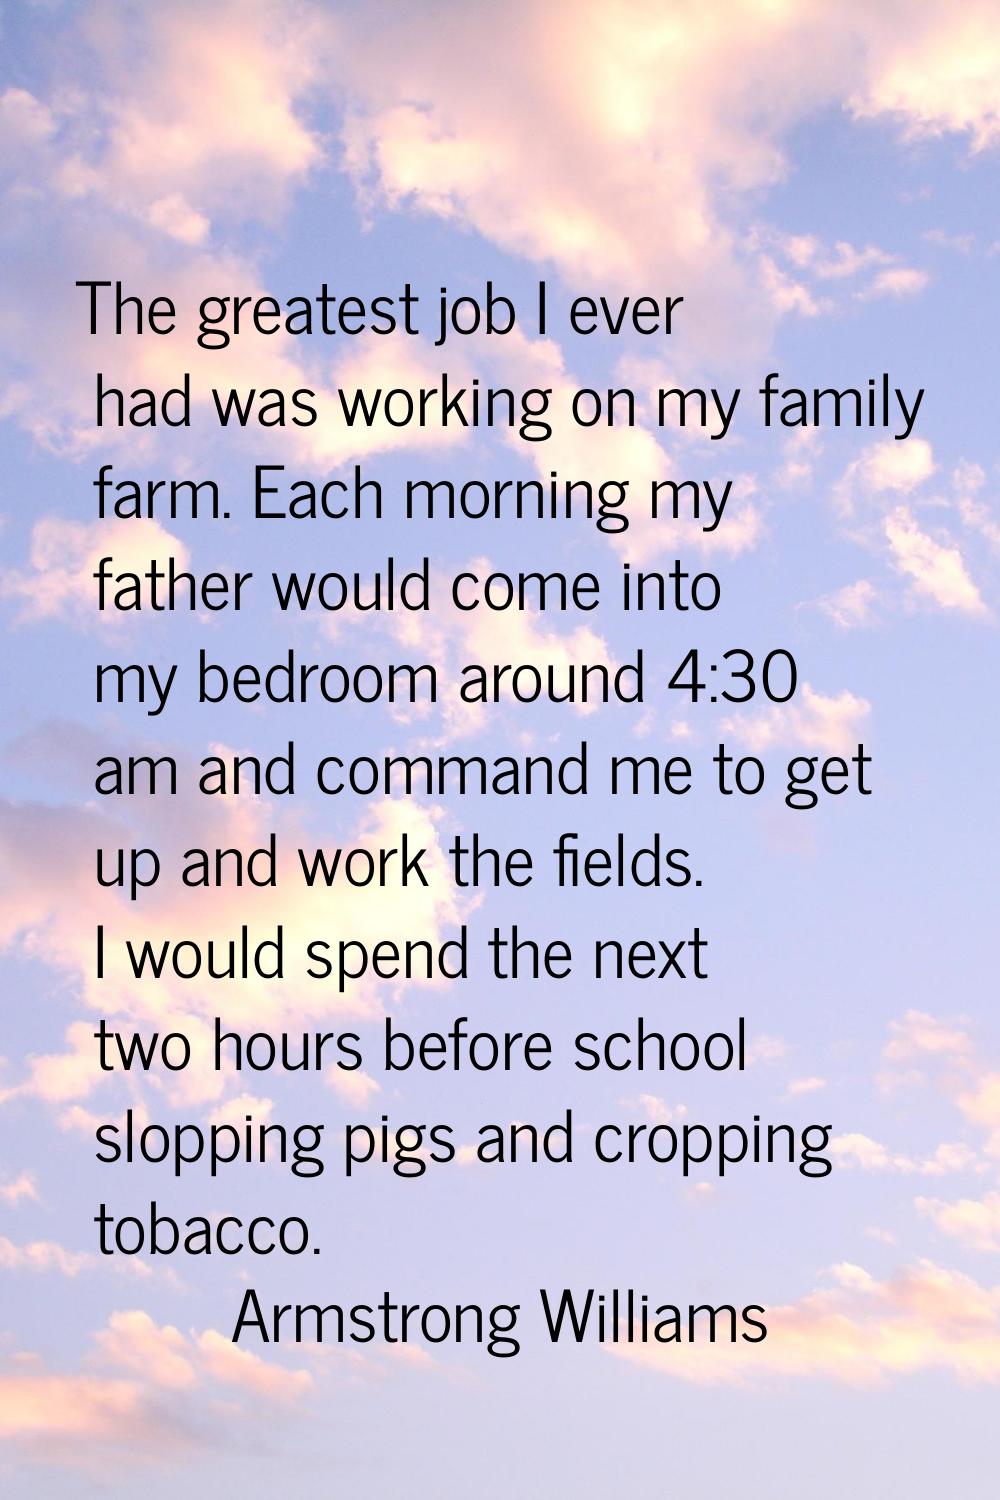 The greatest job I ever had was working on my family farm. Each morning my father would come into m